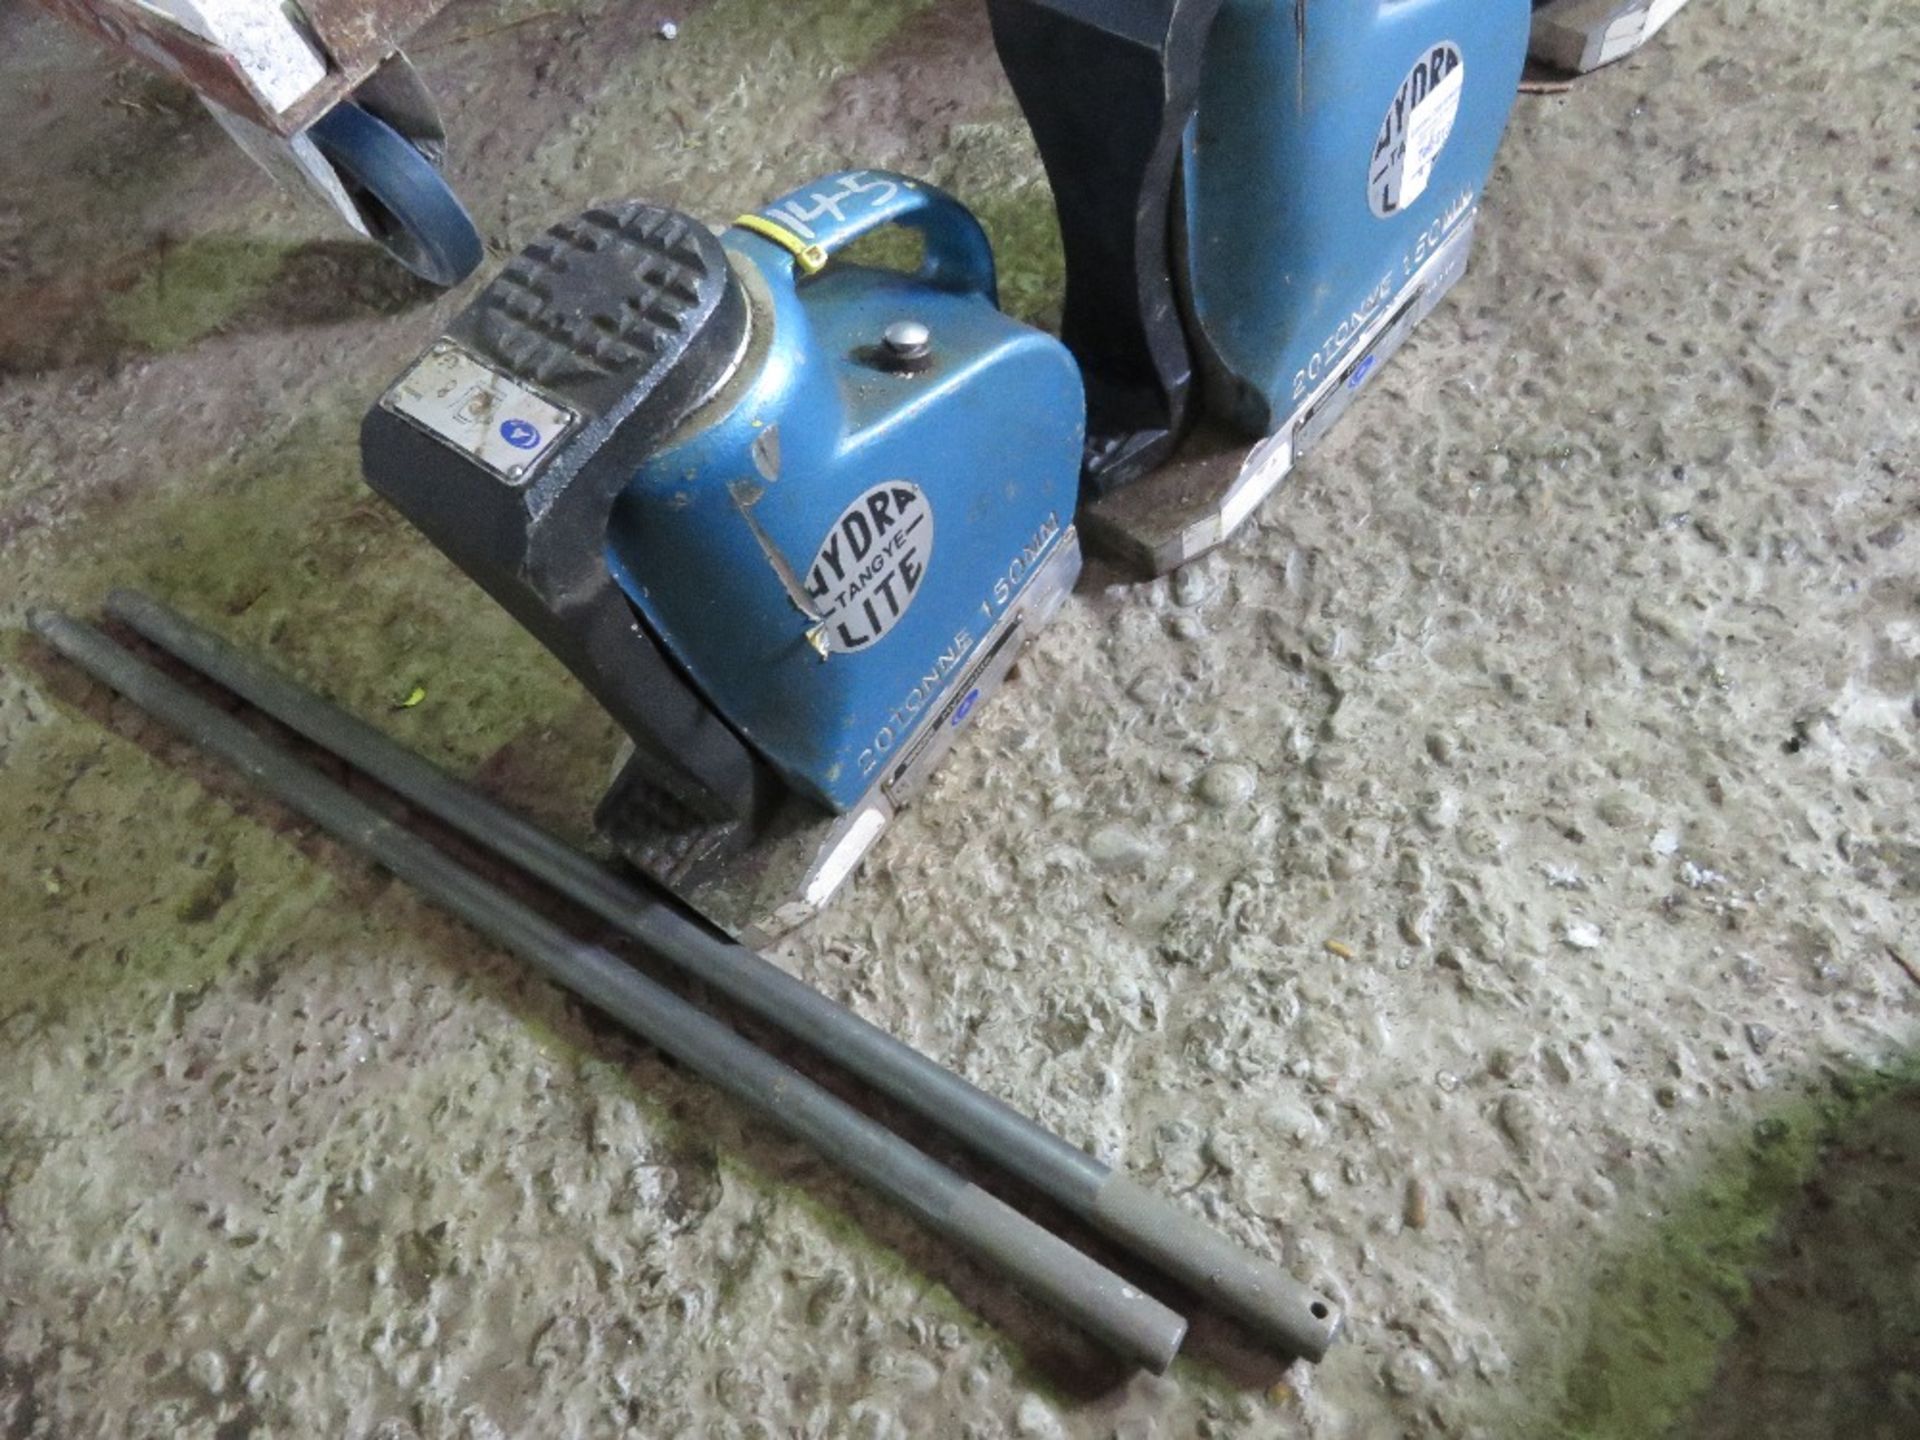 2 X HYDRALITE TANGYE 20TONNE HYDRAULIC JACKS, 150MM RATED LIFT WITH LEVER BARS. THIS LOT IS SOLD - Image 4 of 4